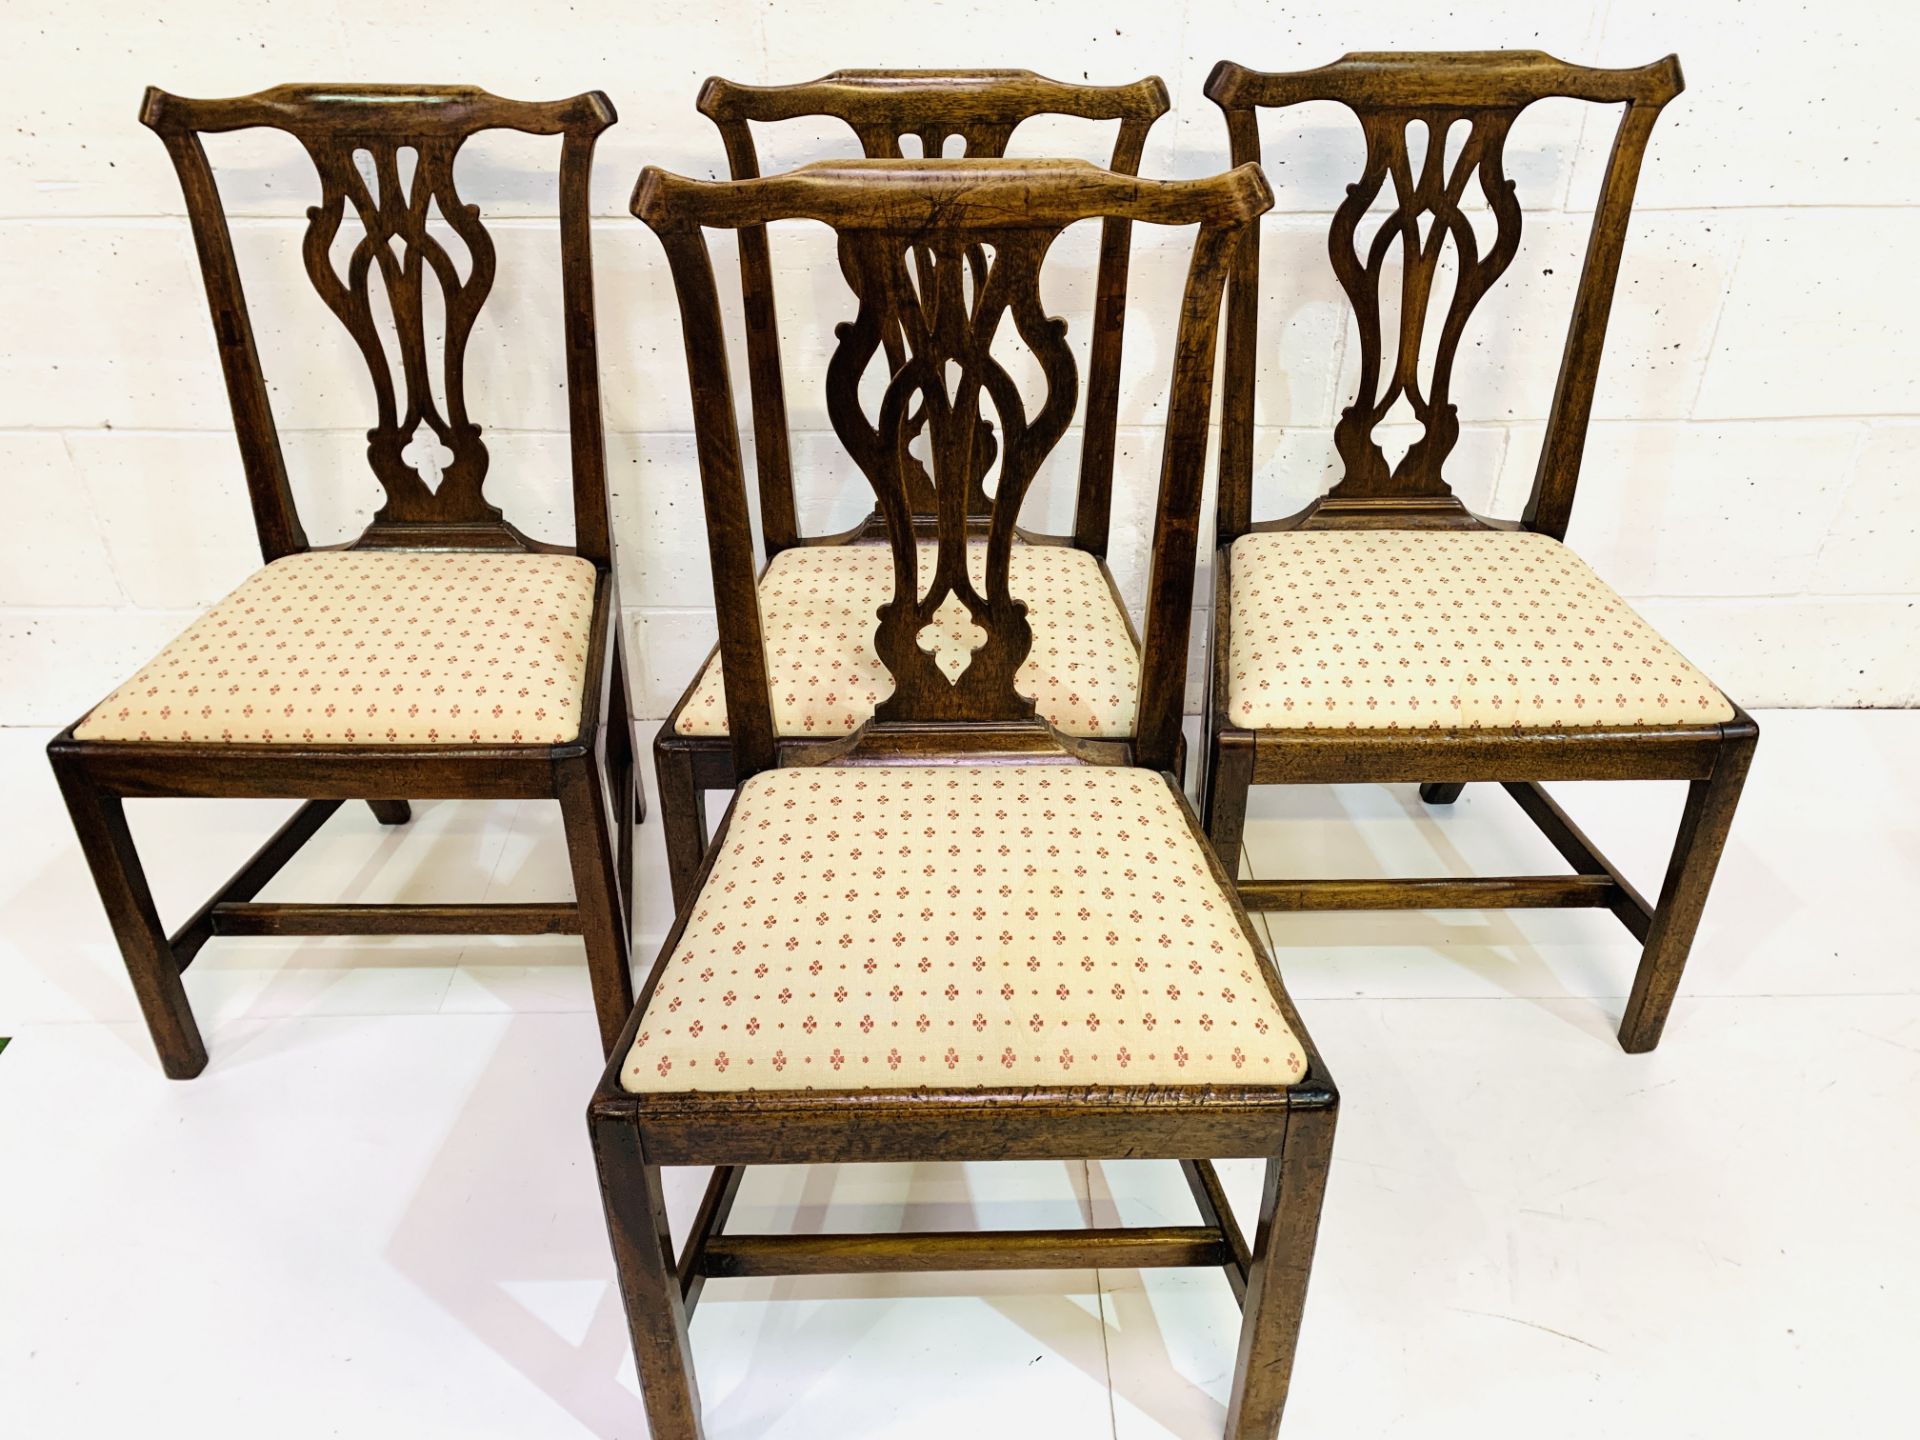 A group of four 19th Century mahogany framed Chippendale style chairs